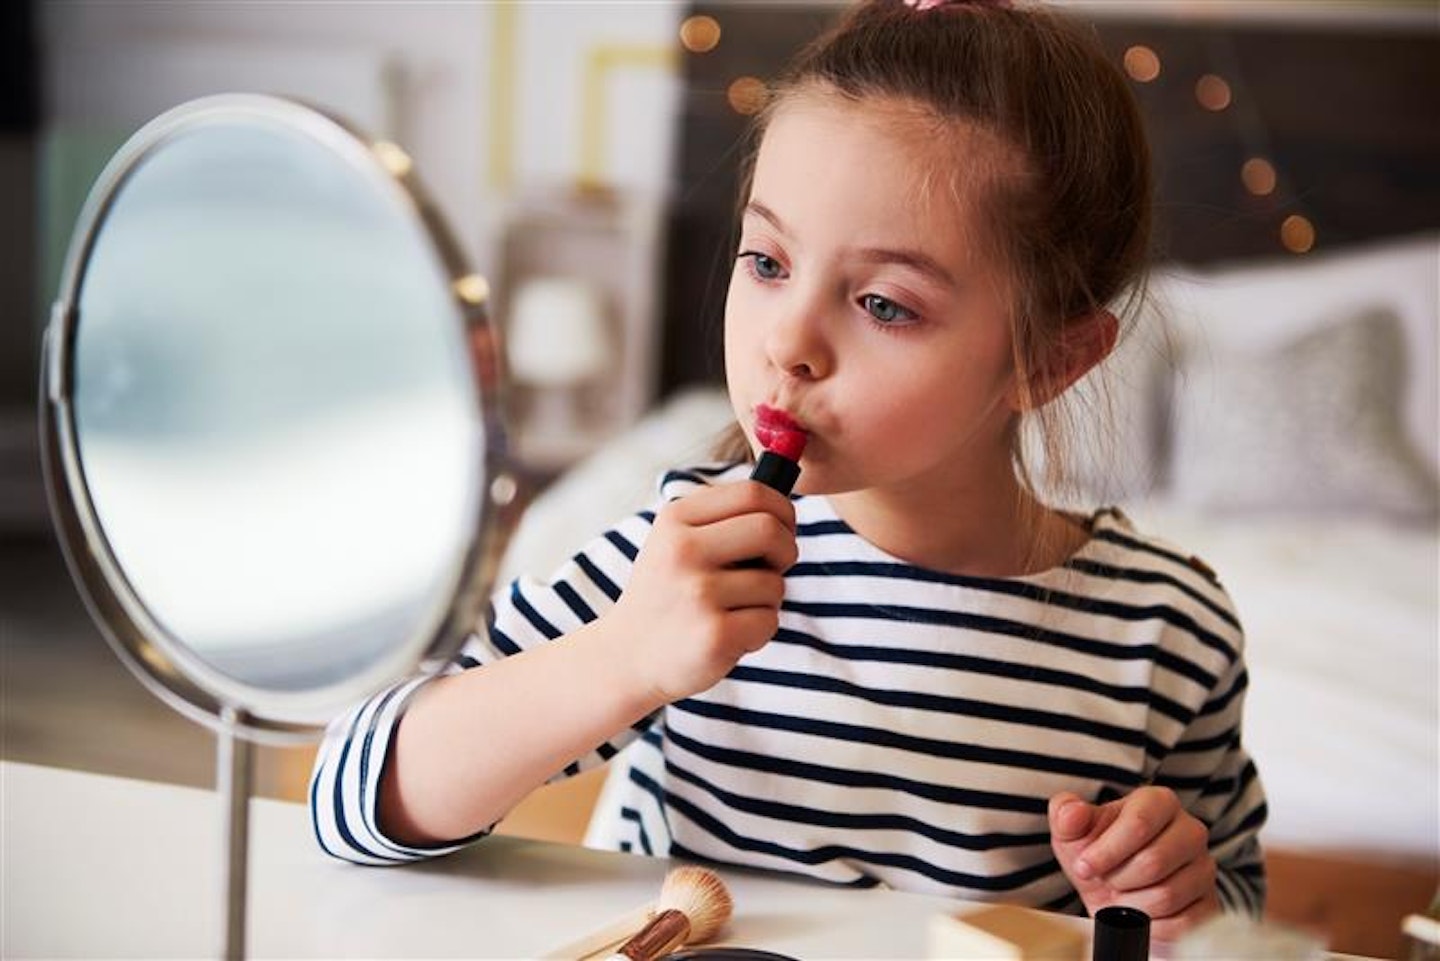 Would You Let Your Child Wear Make-Up?